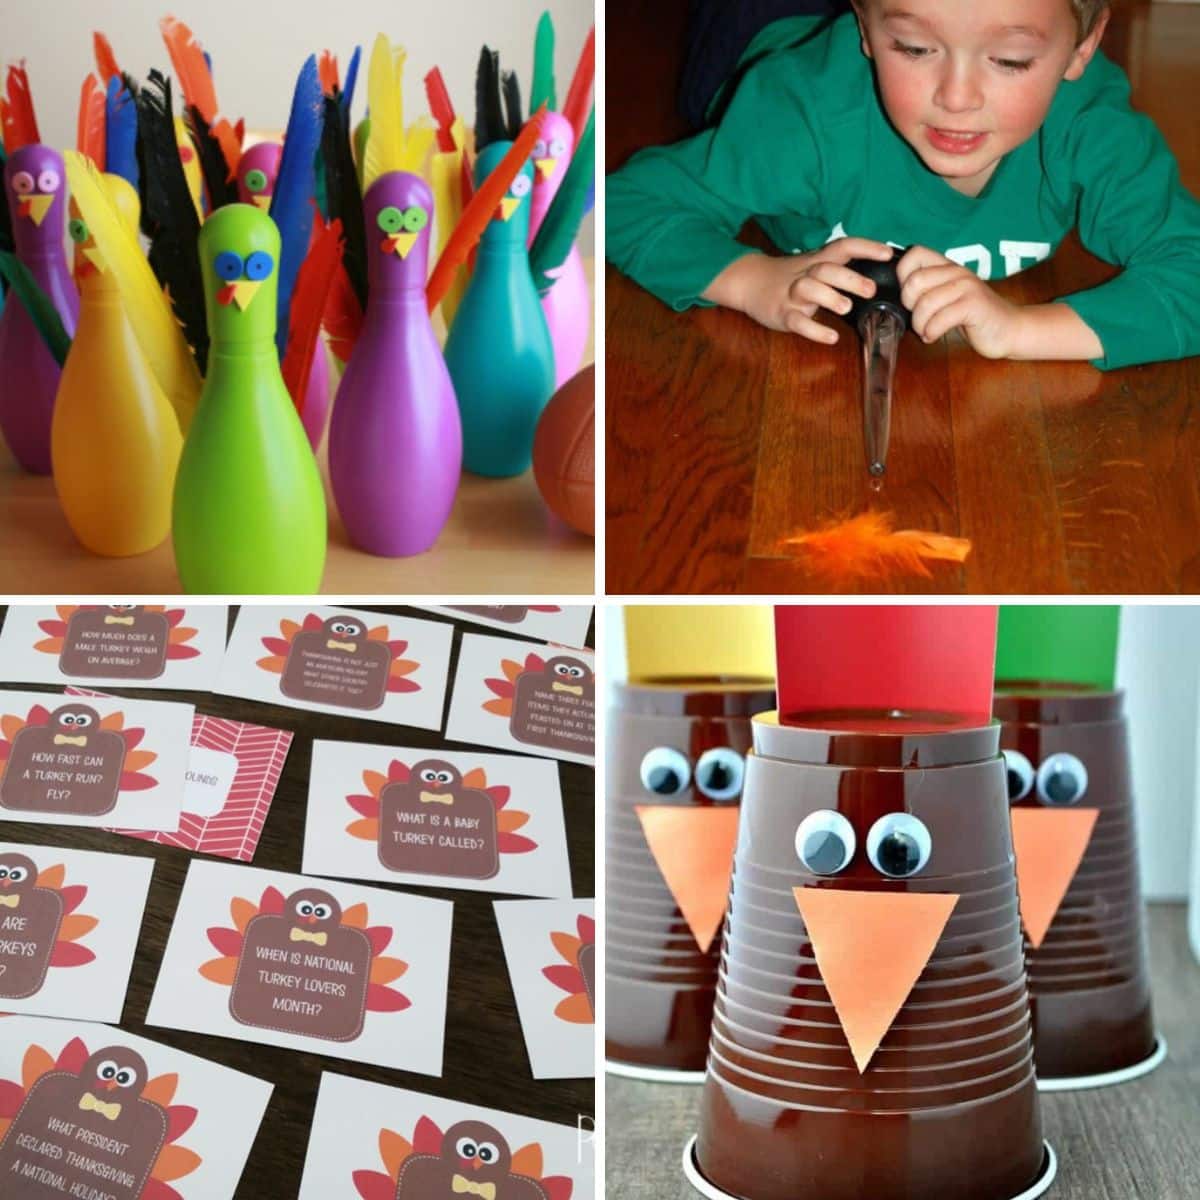 4 images of thanksgiving activities for kids and families.